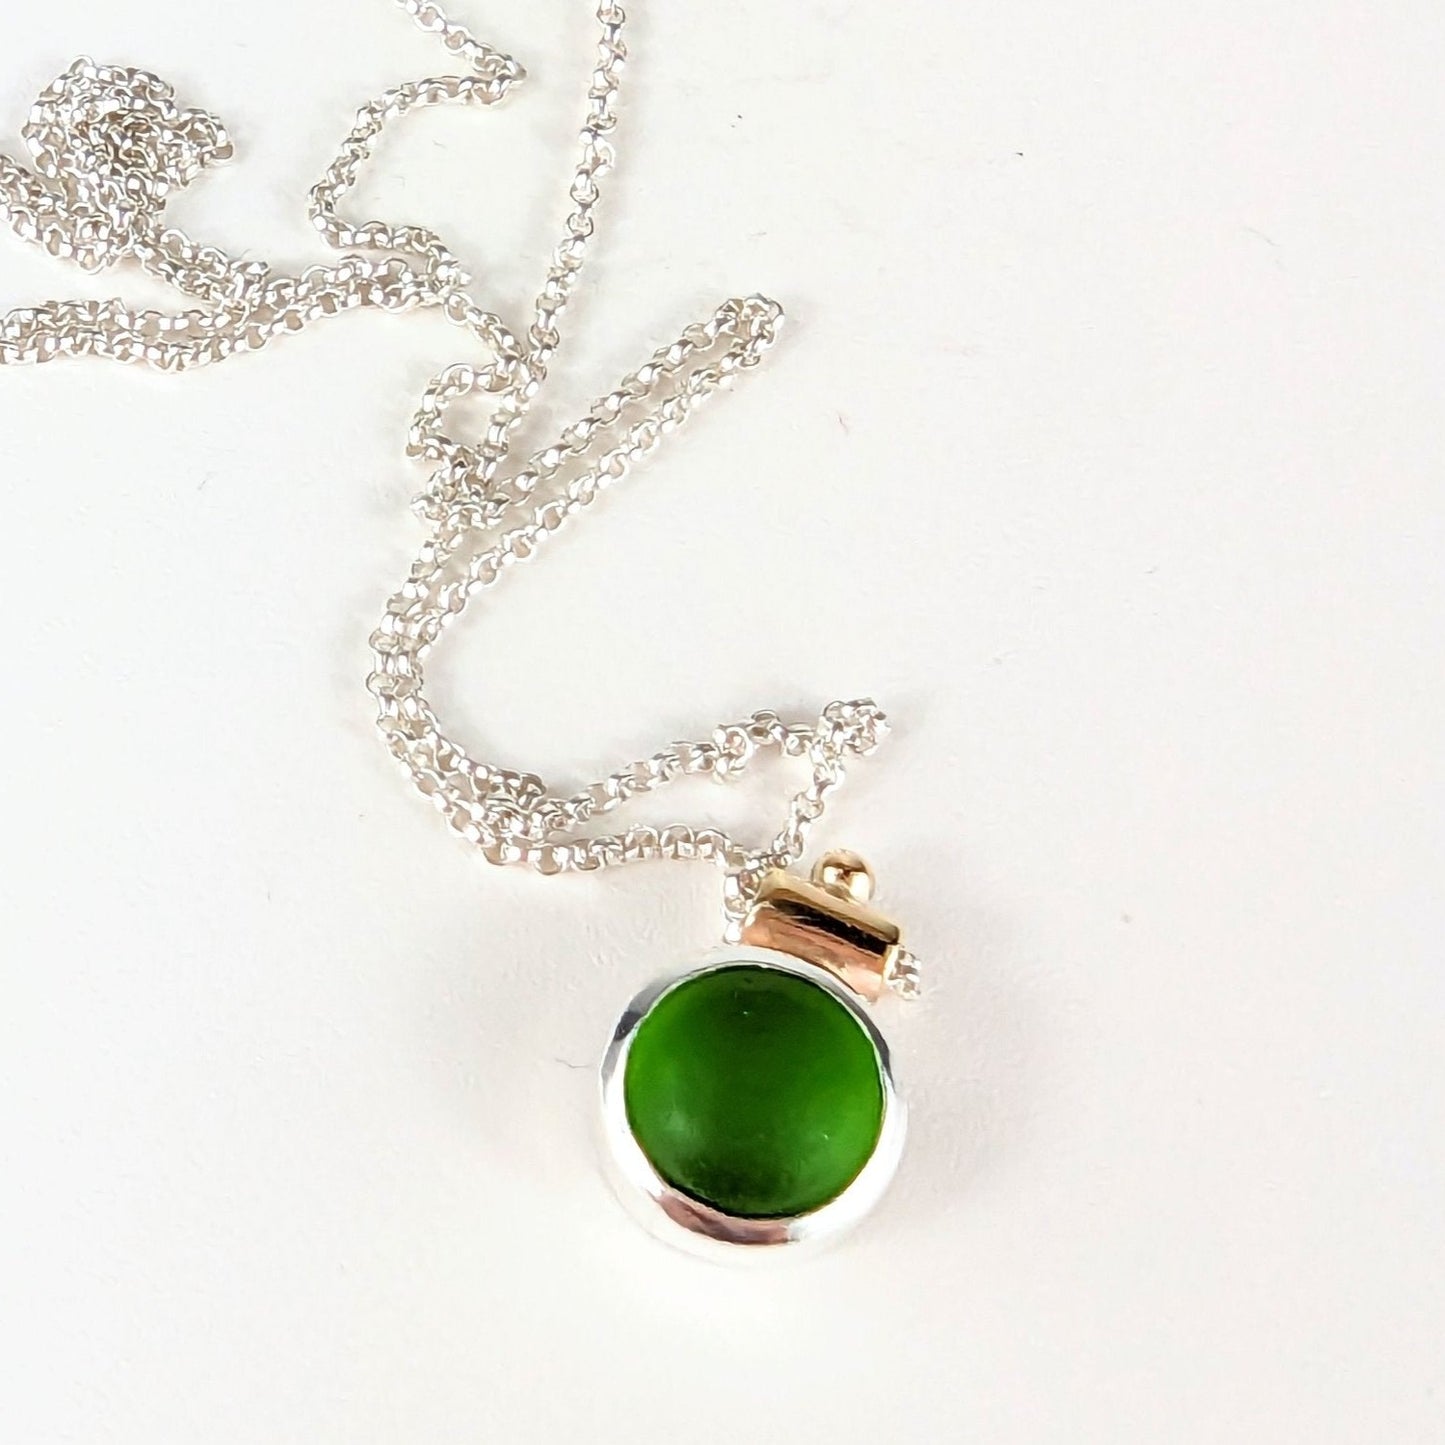 Gold and silver green sea glass necklace Allure Collection by Booblinka Jewellery